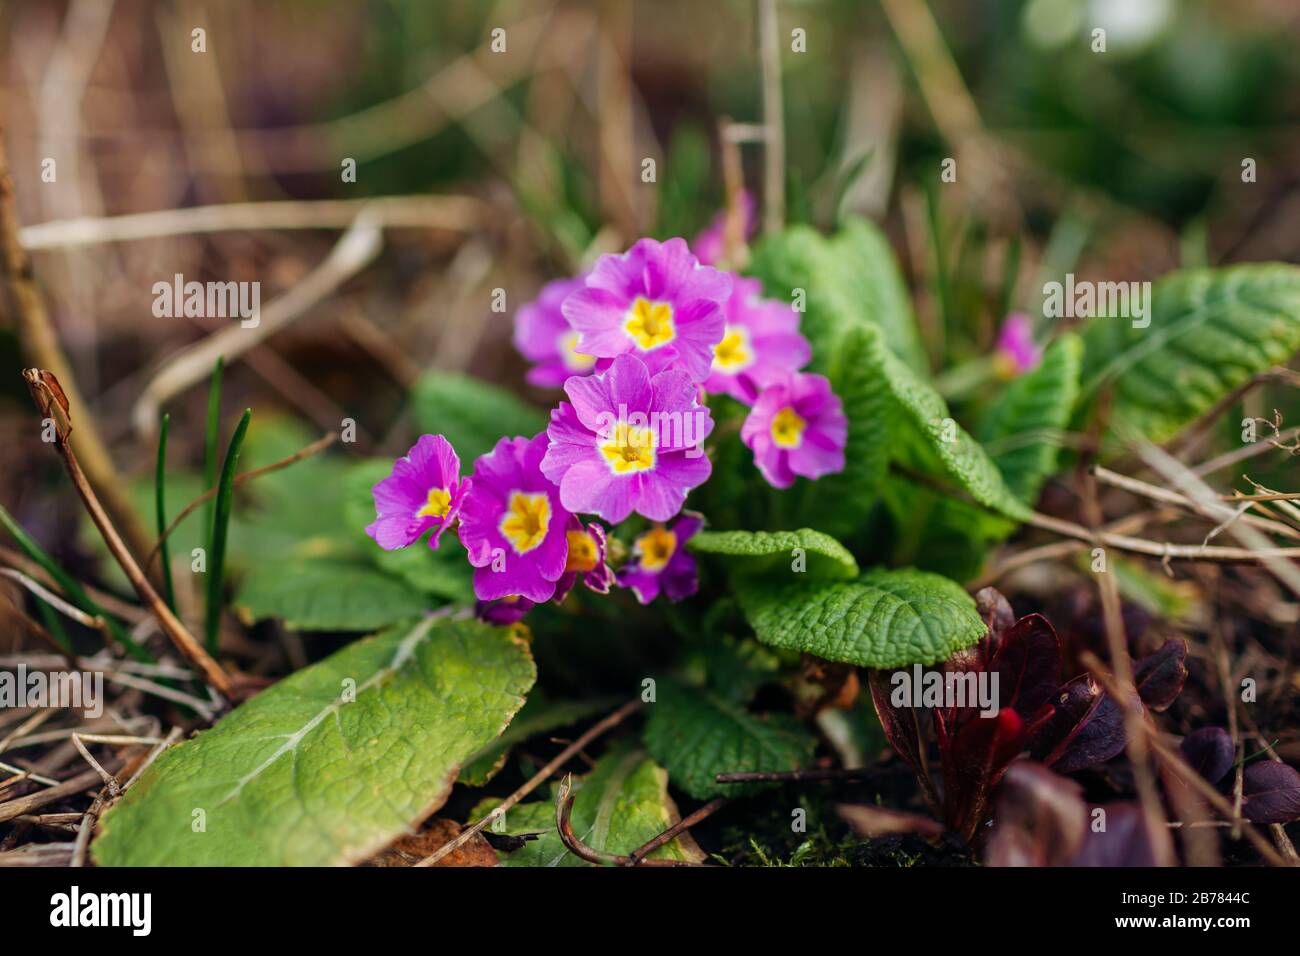 Bunch of purple primroses growing in spring garden. March flowers. Primula blooming in forest. Natural floral background Stock Photo